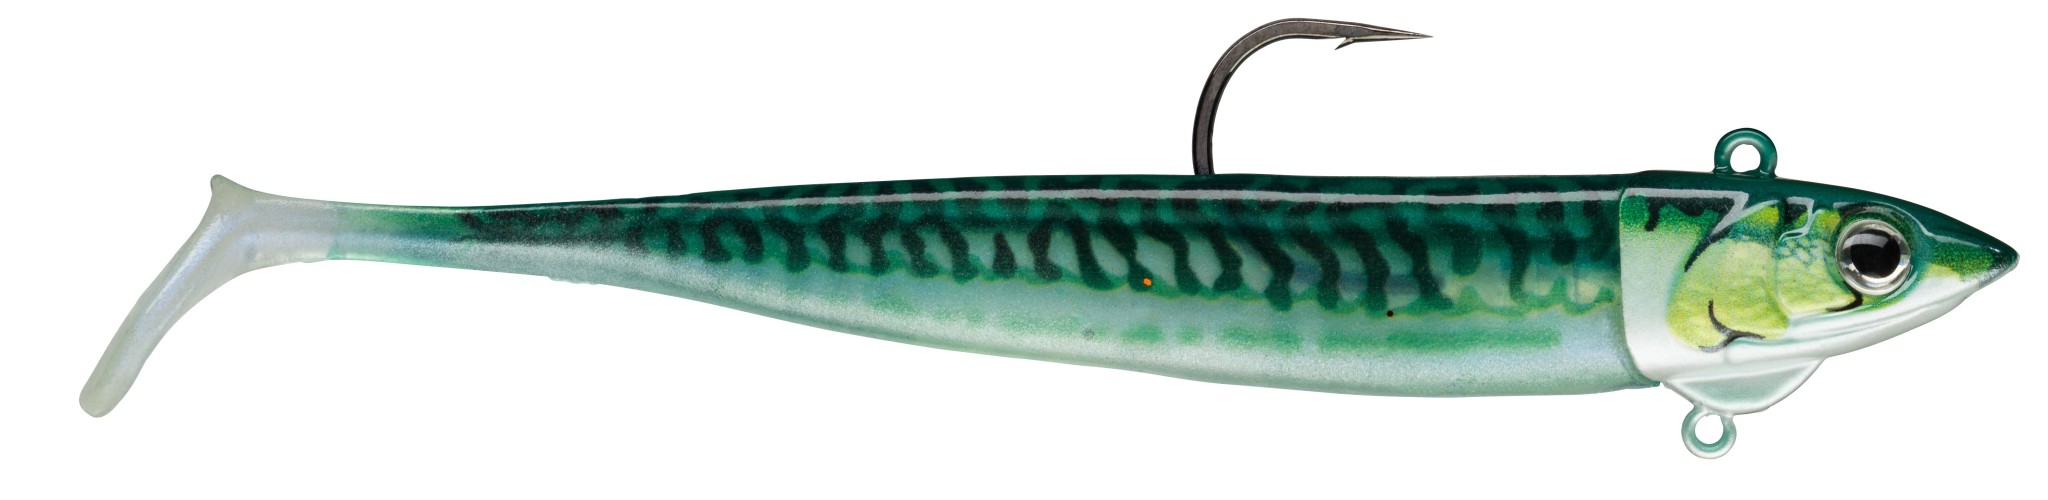 Storm 360GT Coastal Biscay Shad Mounted Lures 2pc – Glasgow